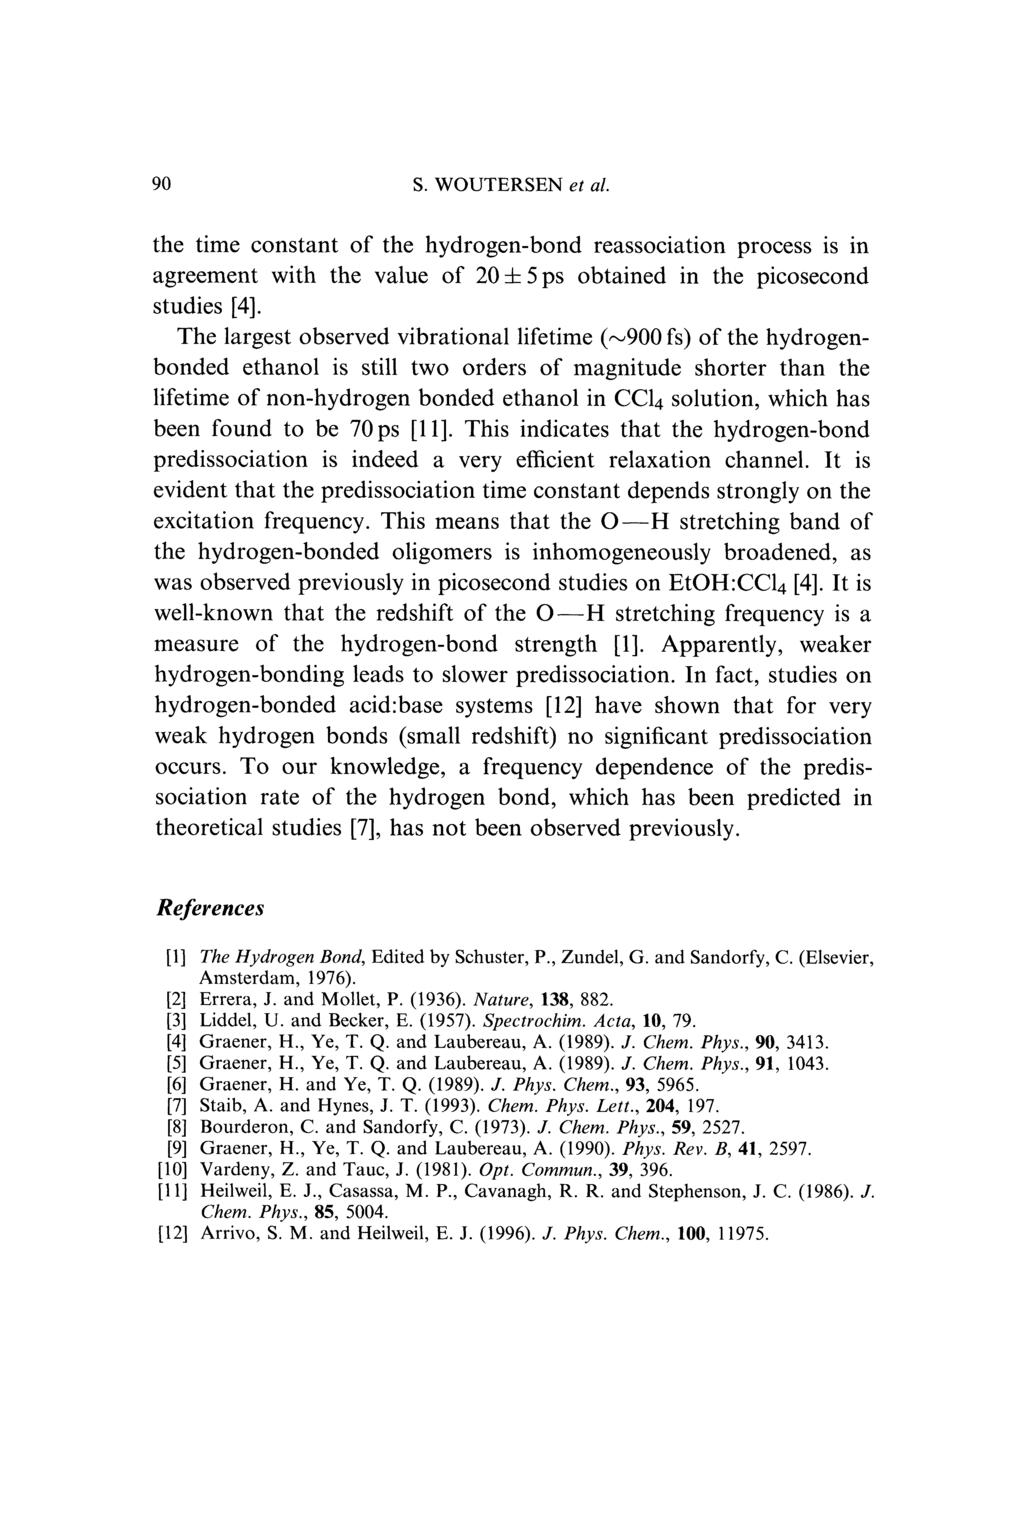 90 S. WOUTERSEN et al. the time constant of the hydrogen-bond reassociation process is in agreement with the value of 20+ 5ps obtained in the picosecond studies [4].